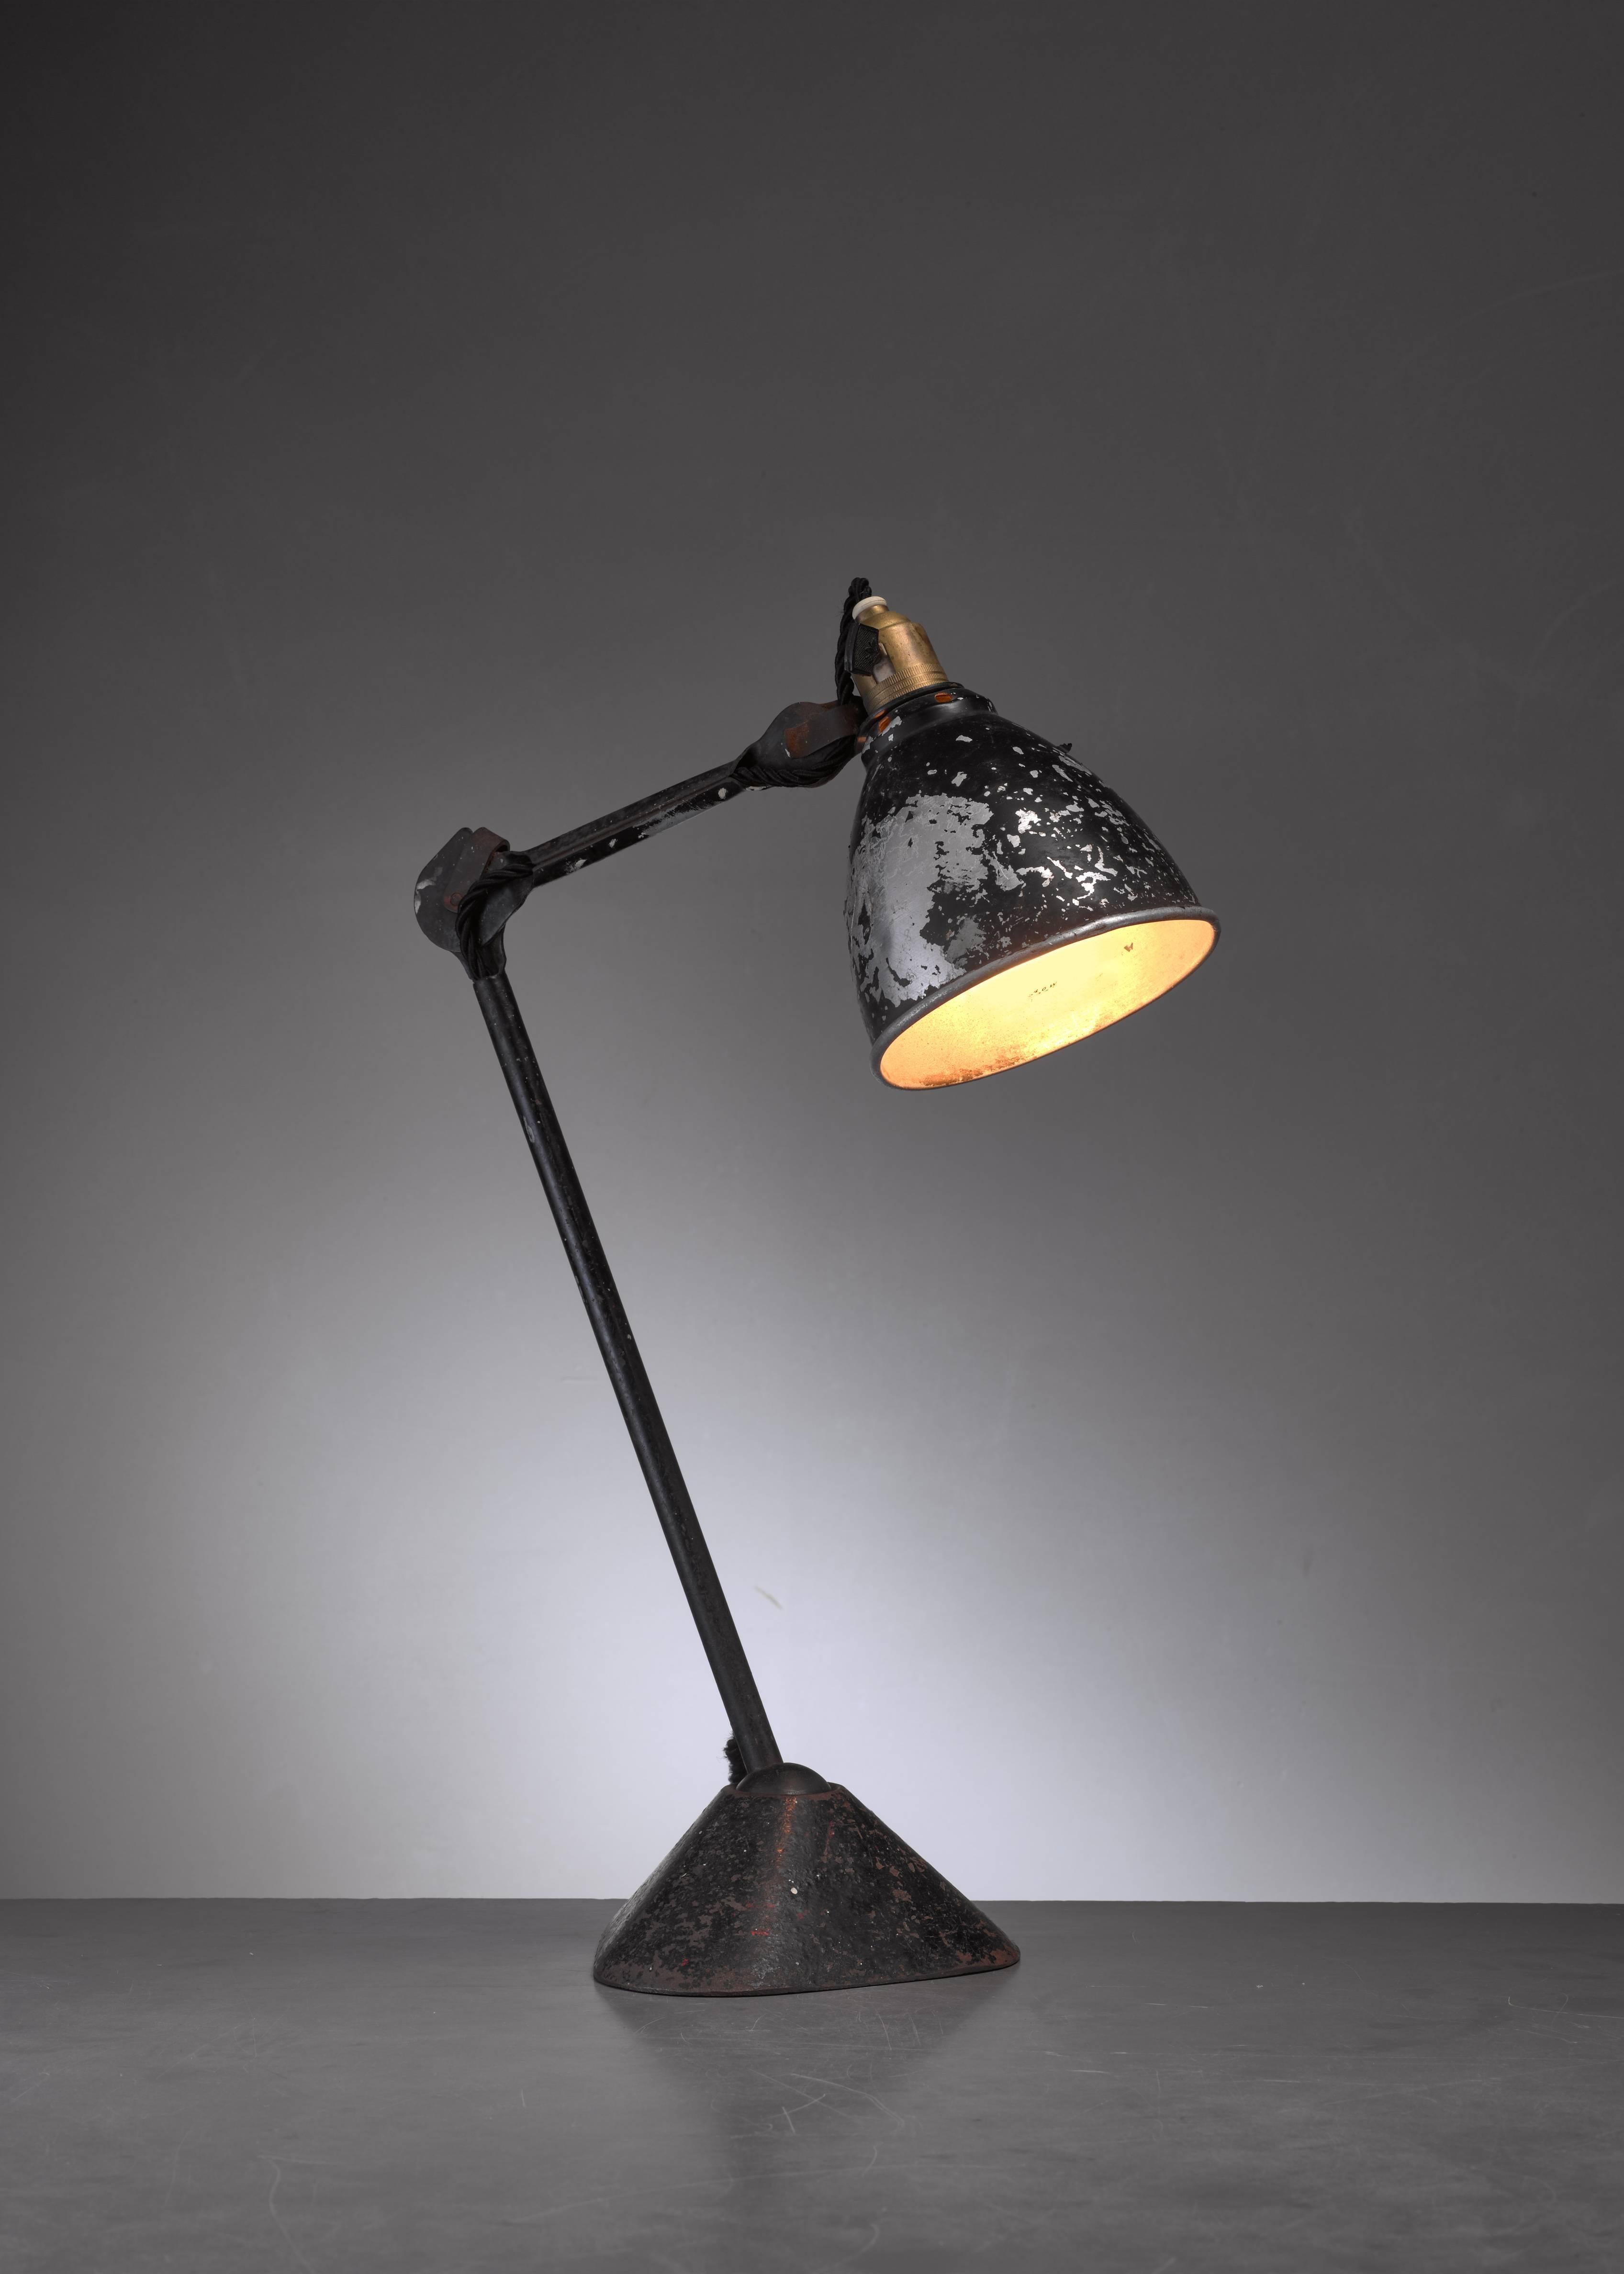 Modern Lampe Gras Table Lamp by Didier des Gachons & Ravel, France, 1920s For Sale